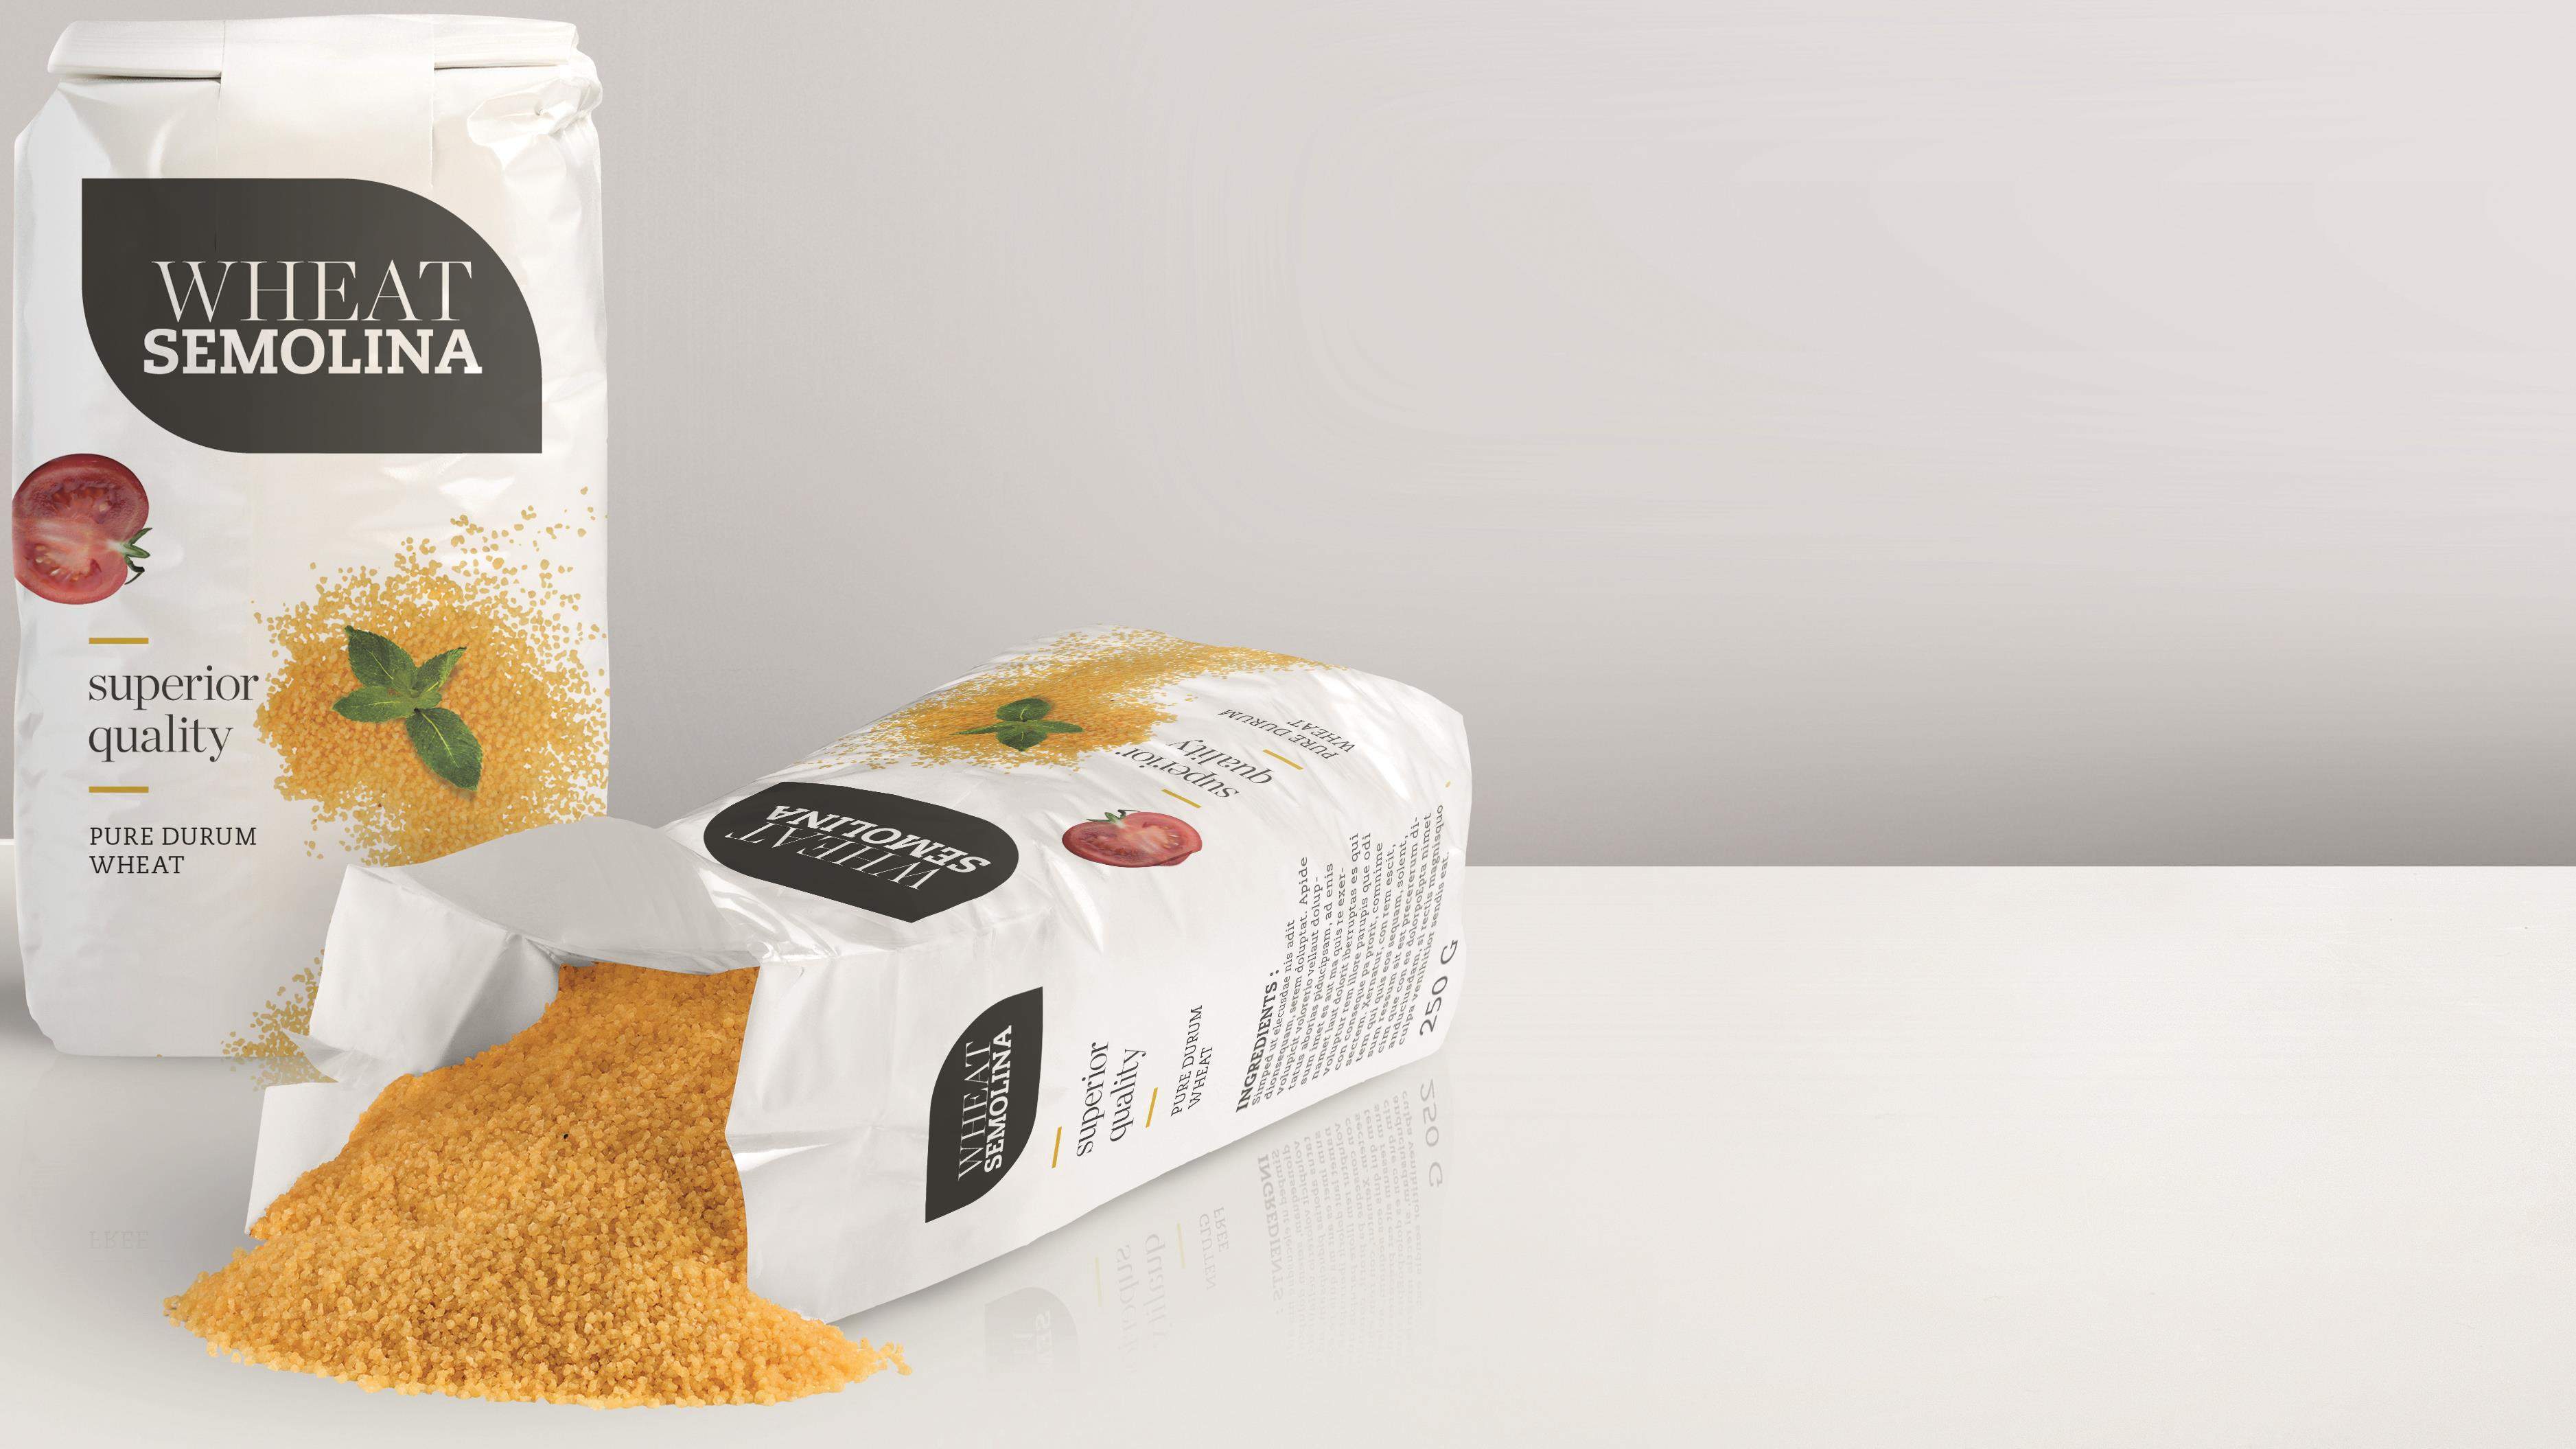 Munksjö launches Gerstar Mo, a barrier paper to prevent mineral oil migration into food